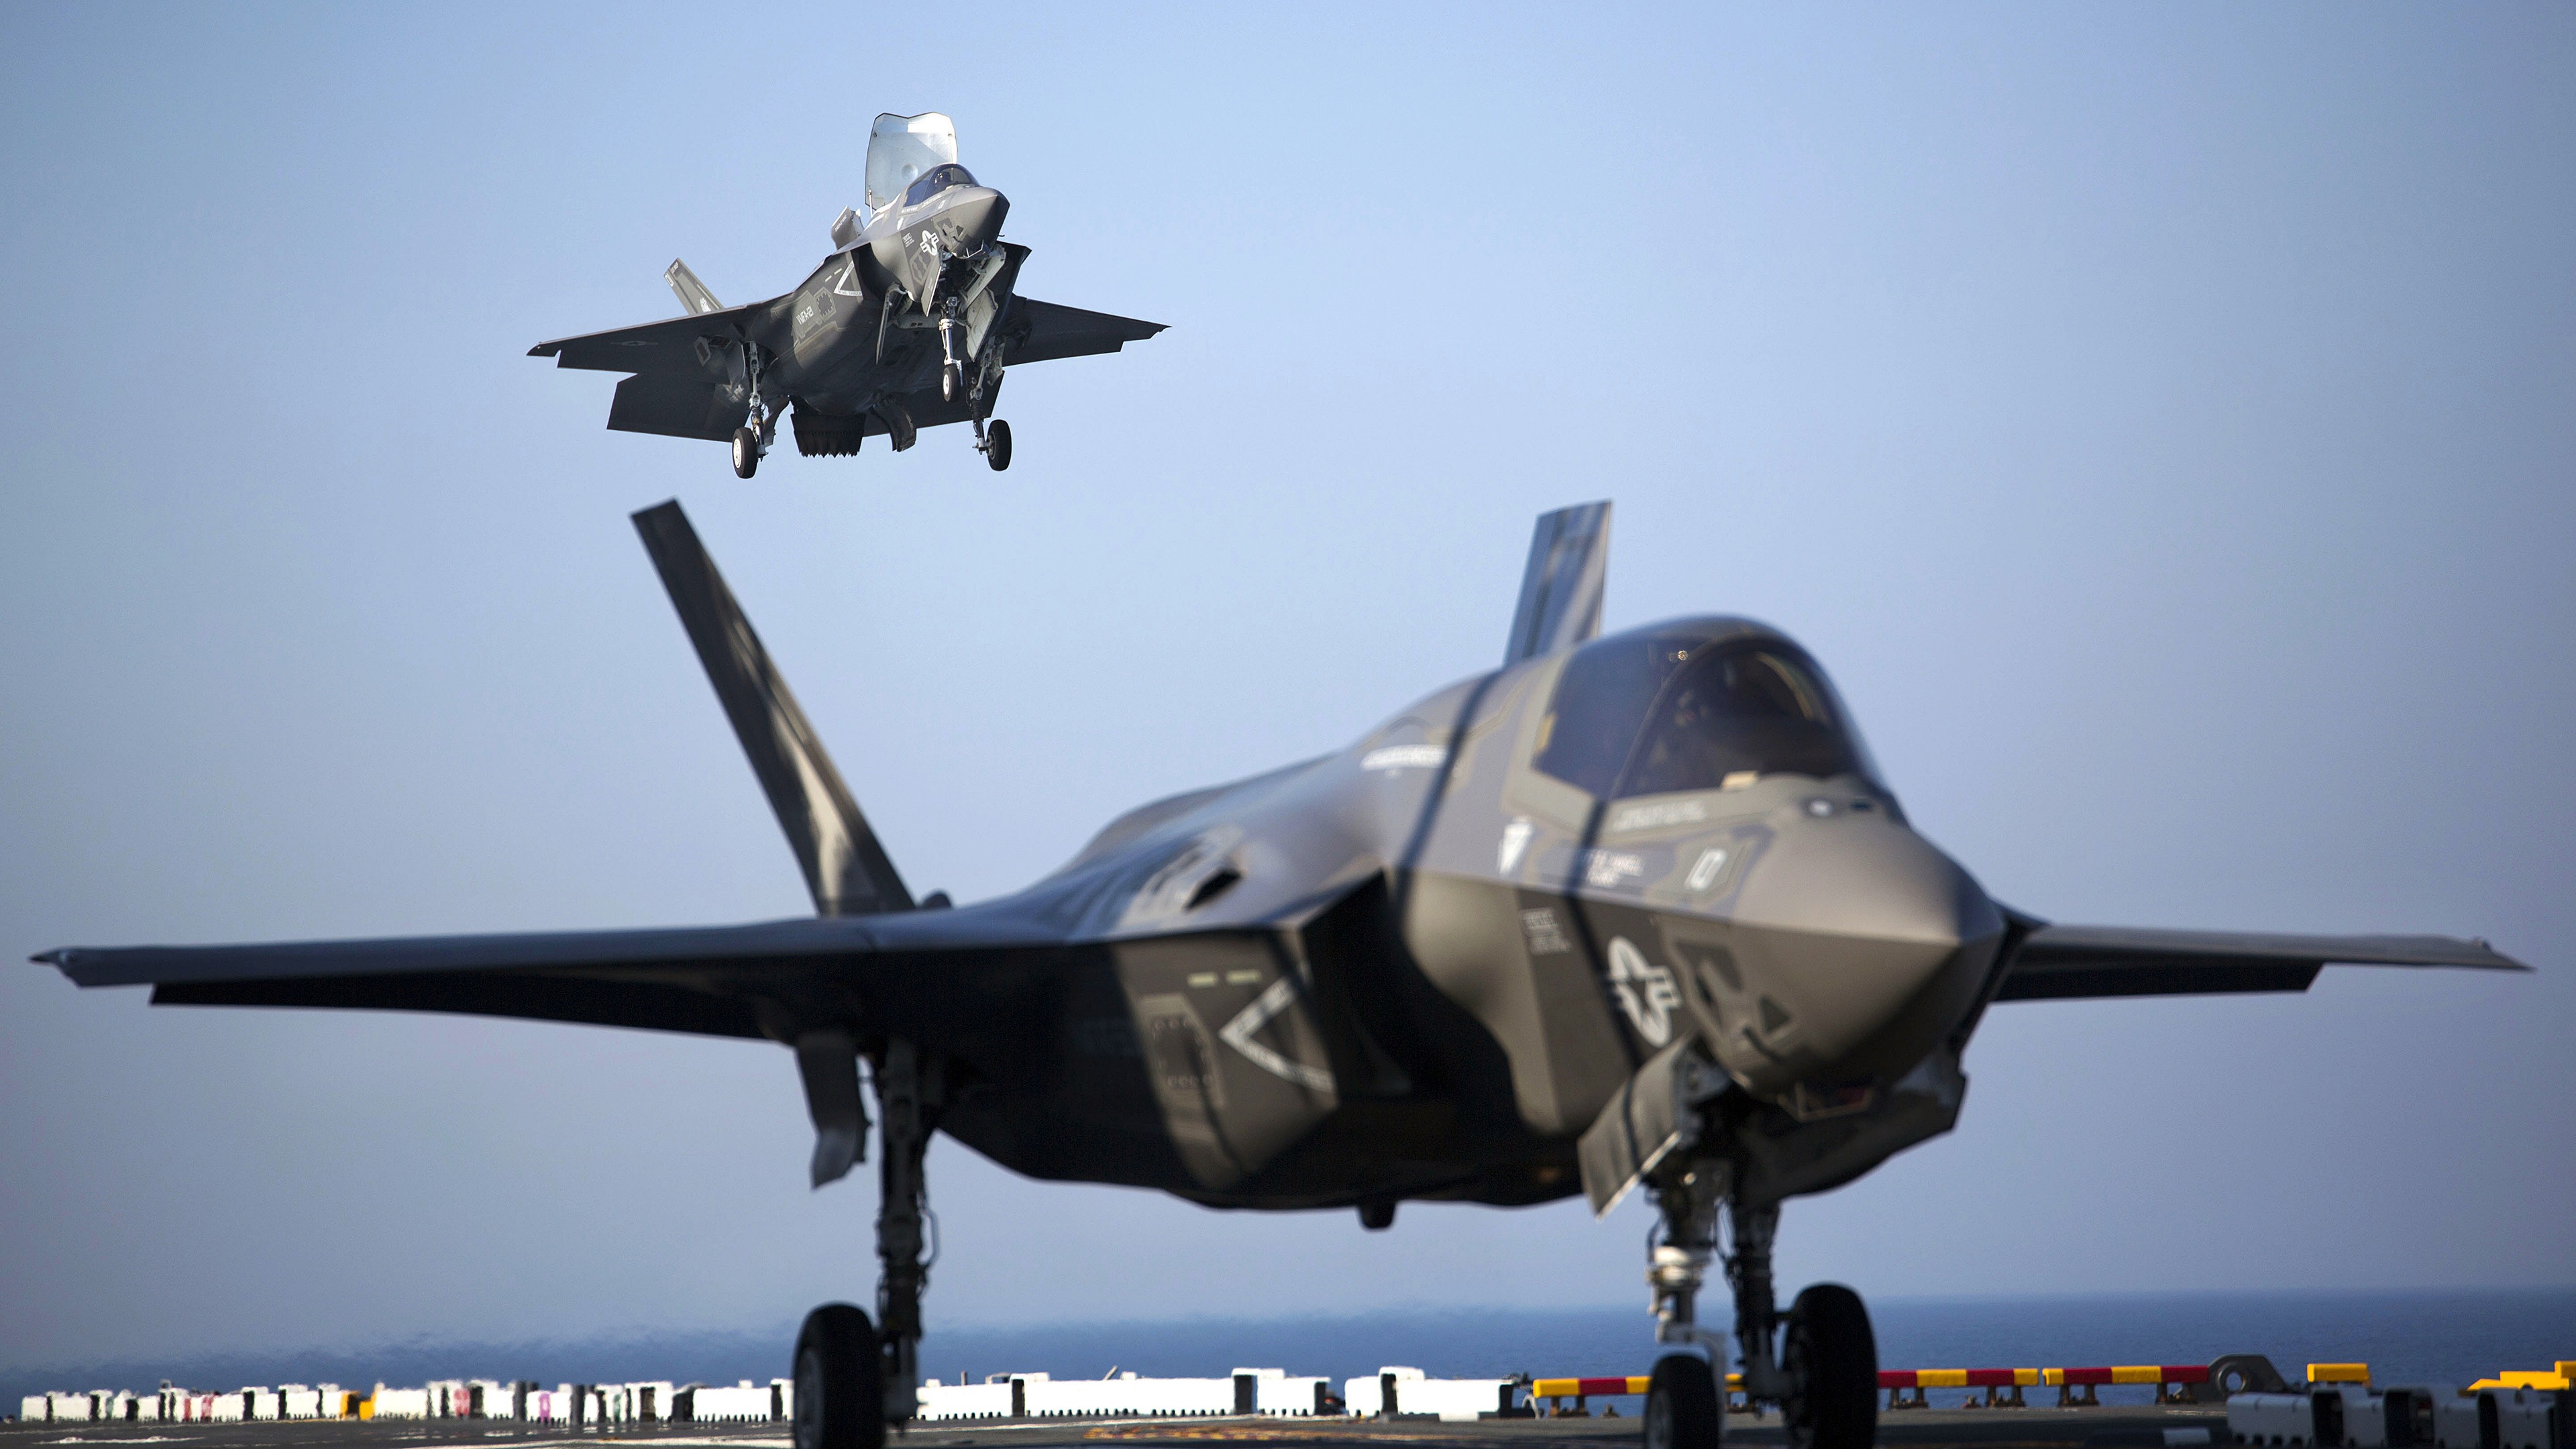 General 3840x2160 Lockheed Martin F-35 Lightning II military aircraft aircraft jet fighter stealth military military vehicle Vertical Take-Off and Landing United States Marine Corps Lockheed Martin vehicle American aircraft water frontal view pilot men USS Wasp (LHD-1)